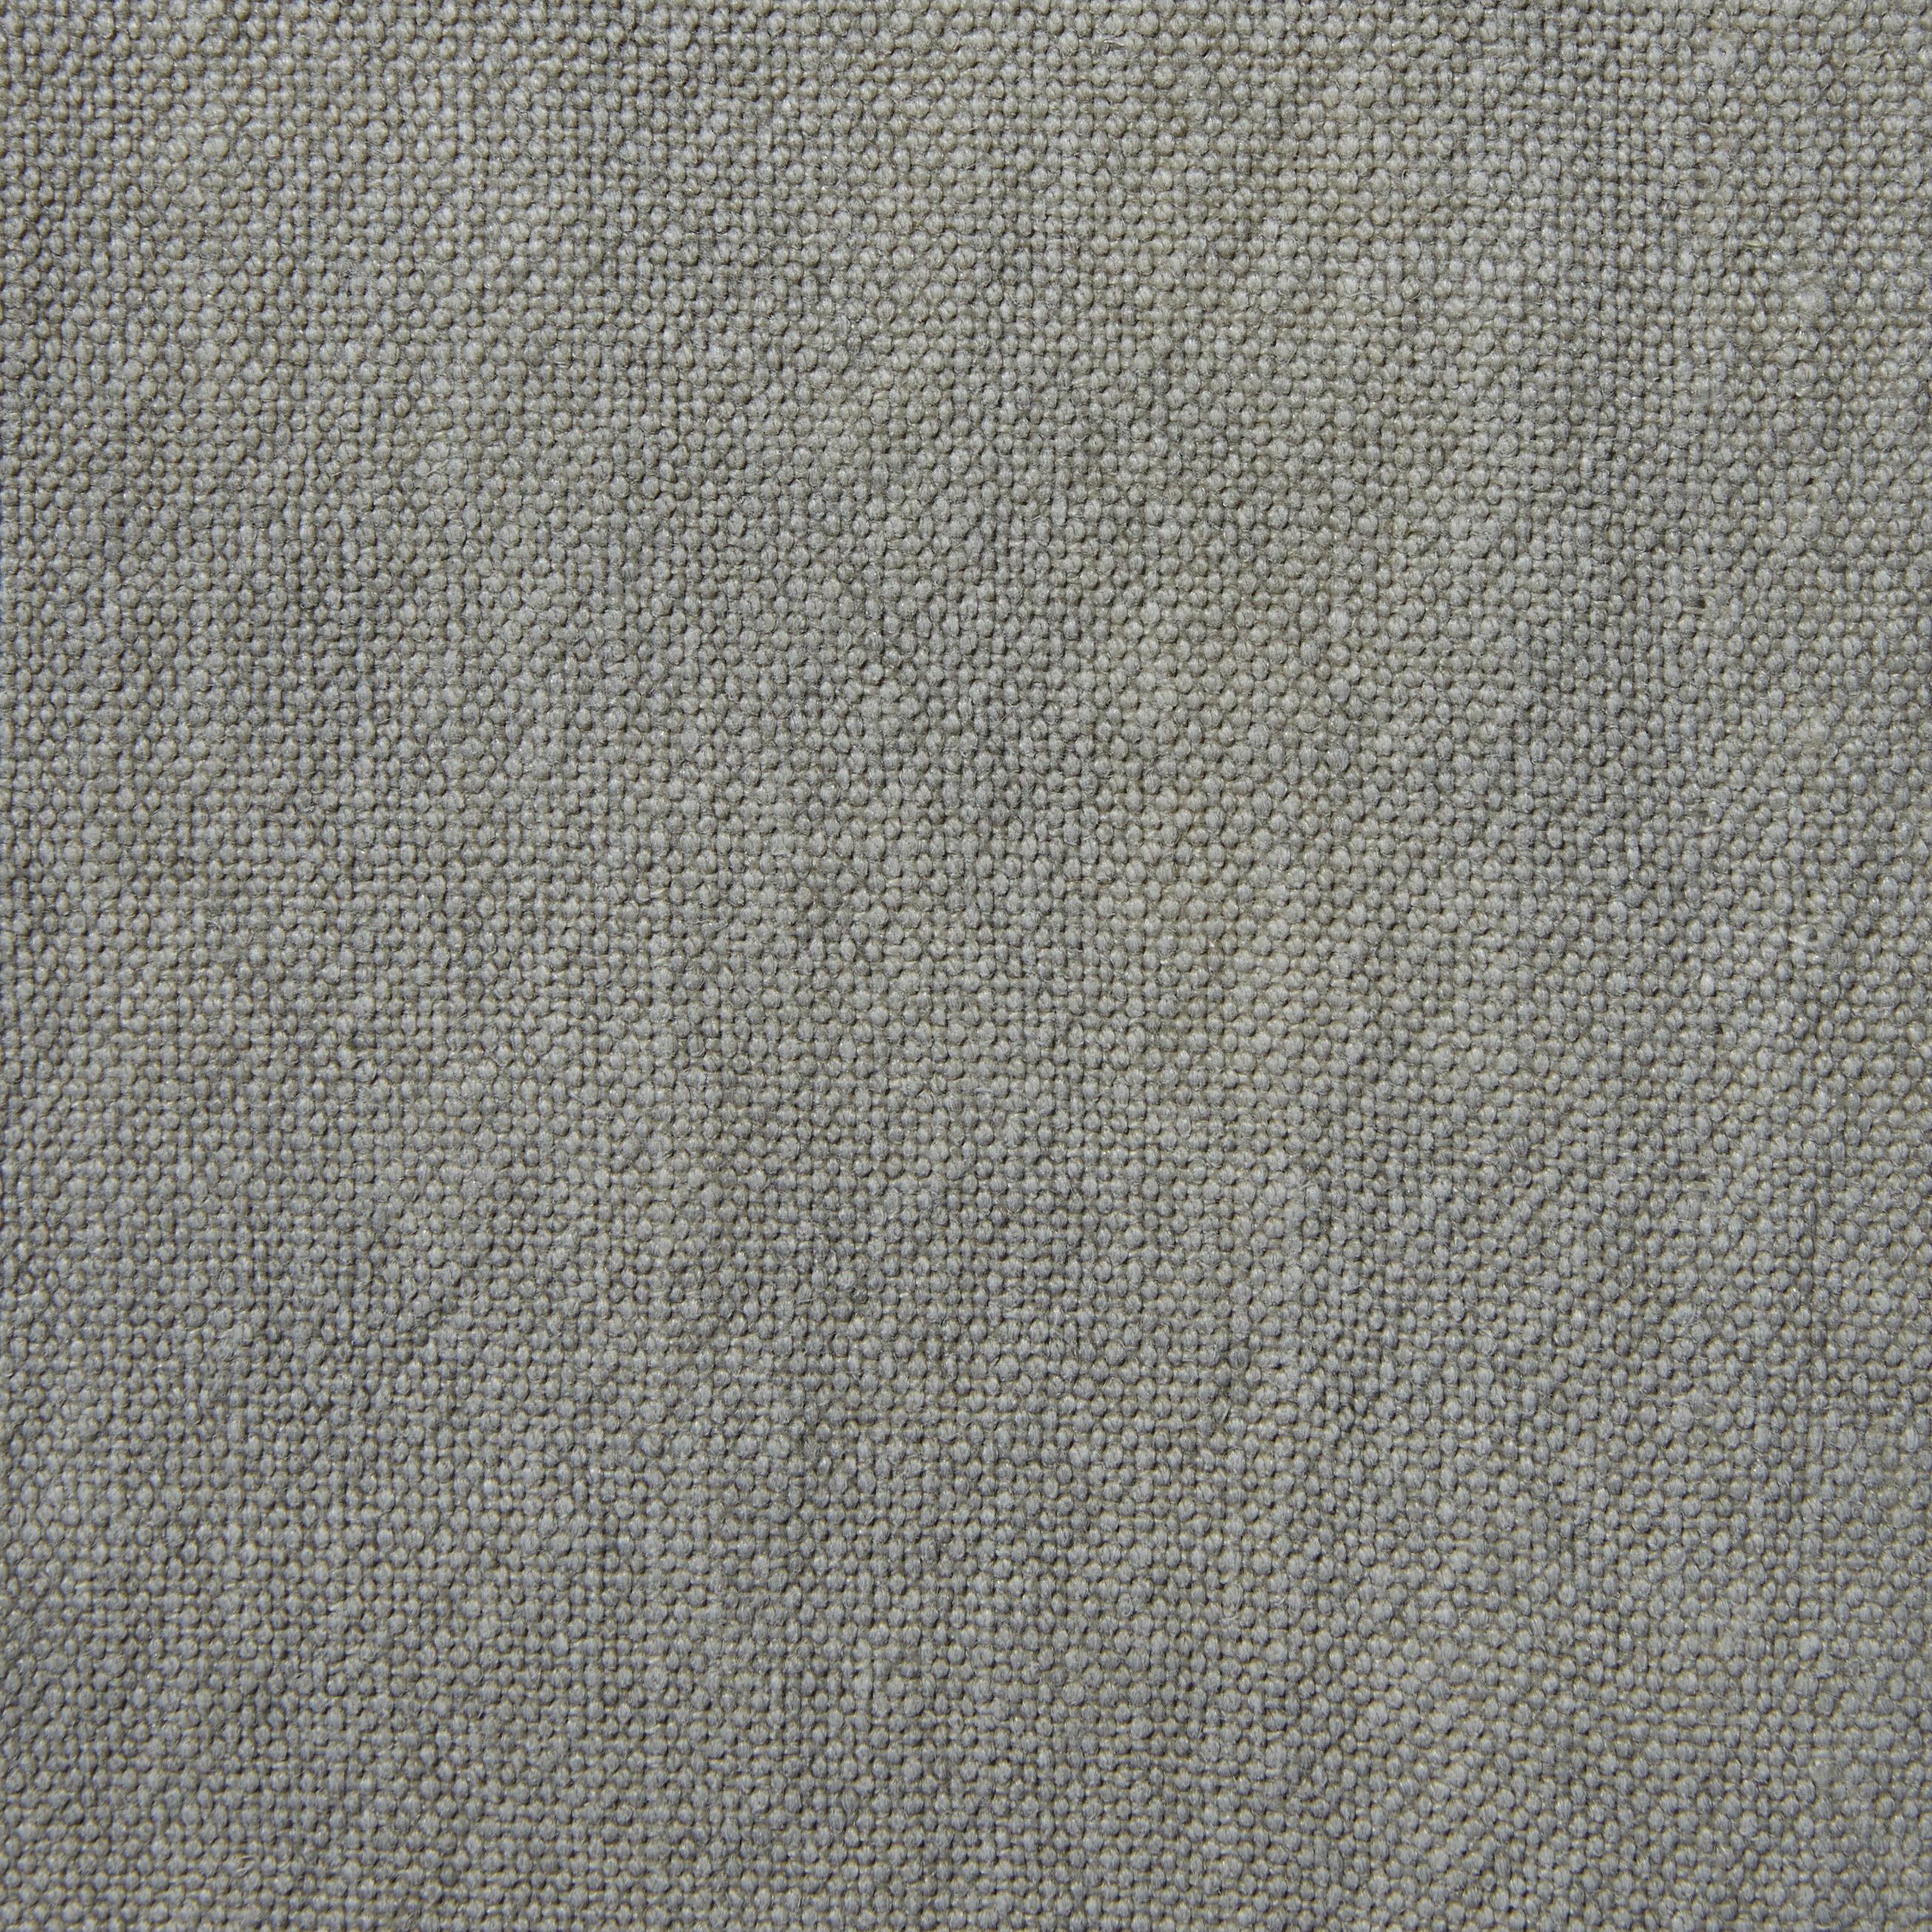 a close up of a gray fabric texture